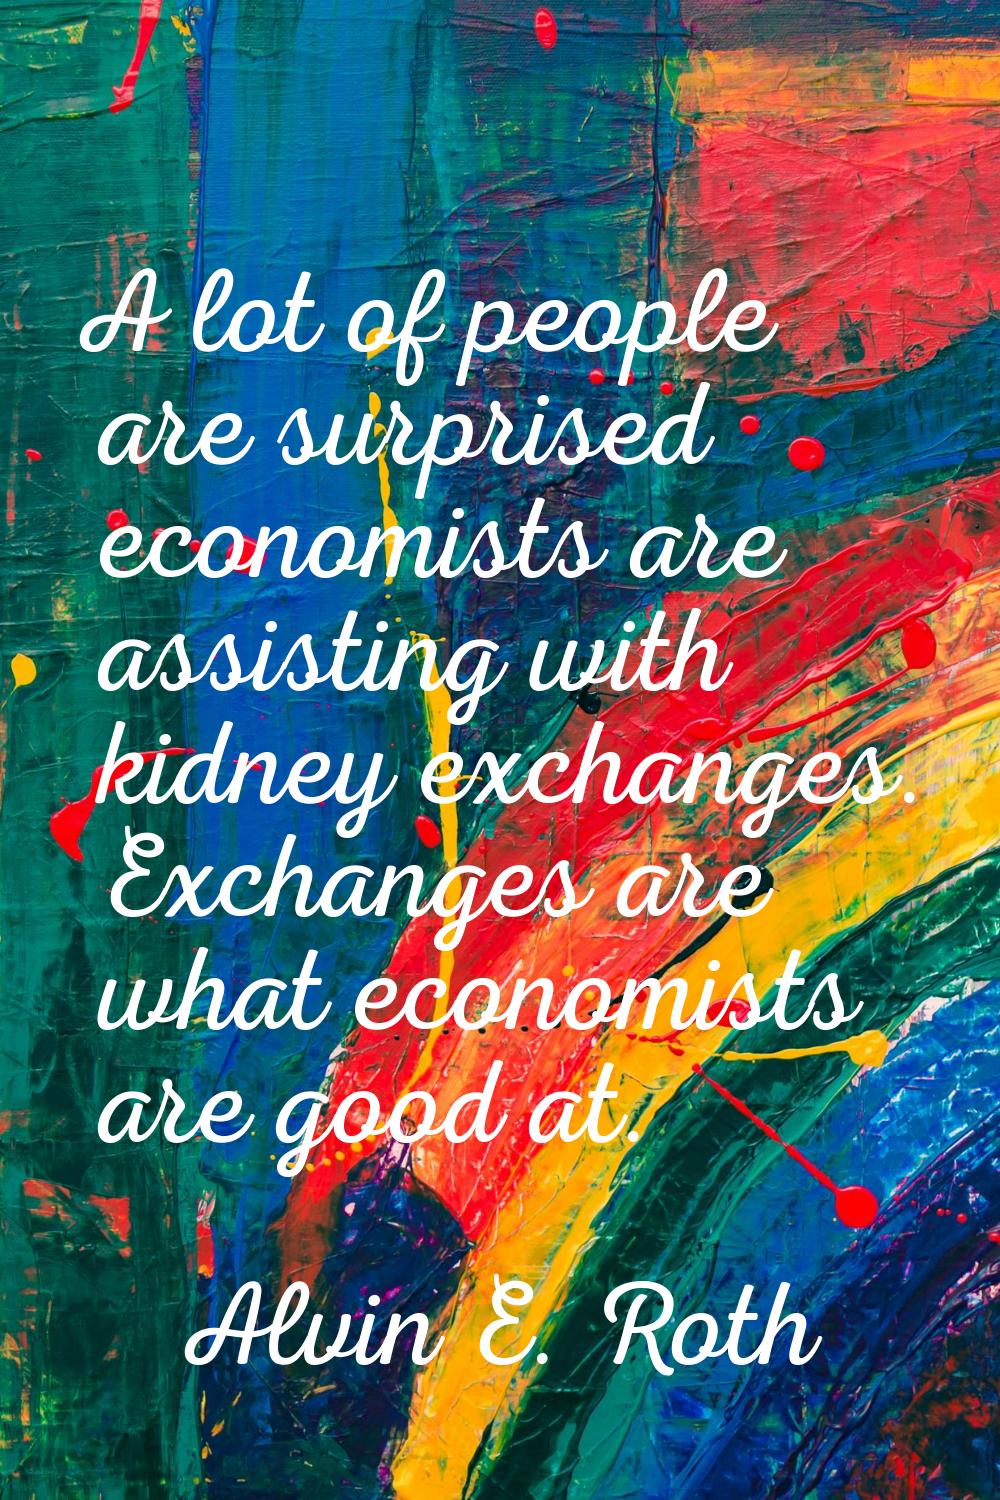 A lot of people are surprised economists are assisting with kidney exchanges. Exchanges are what ec